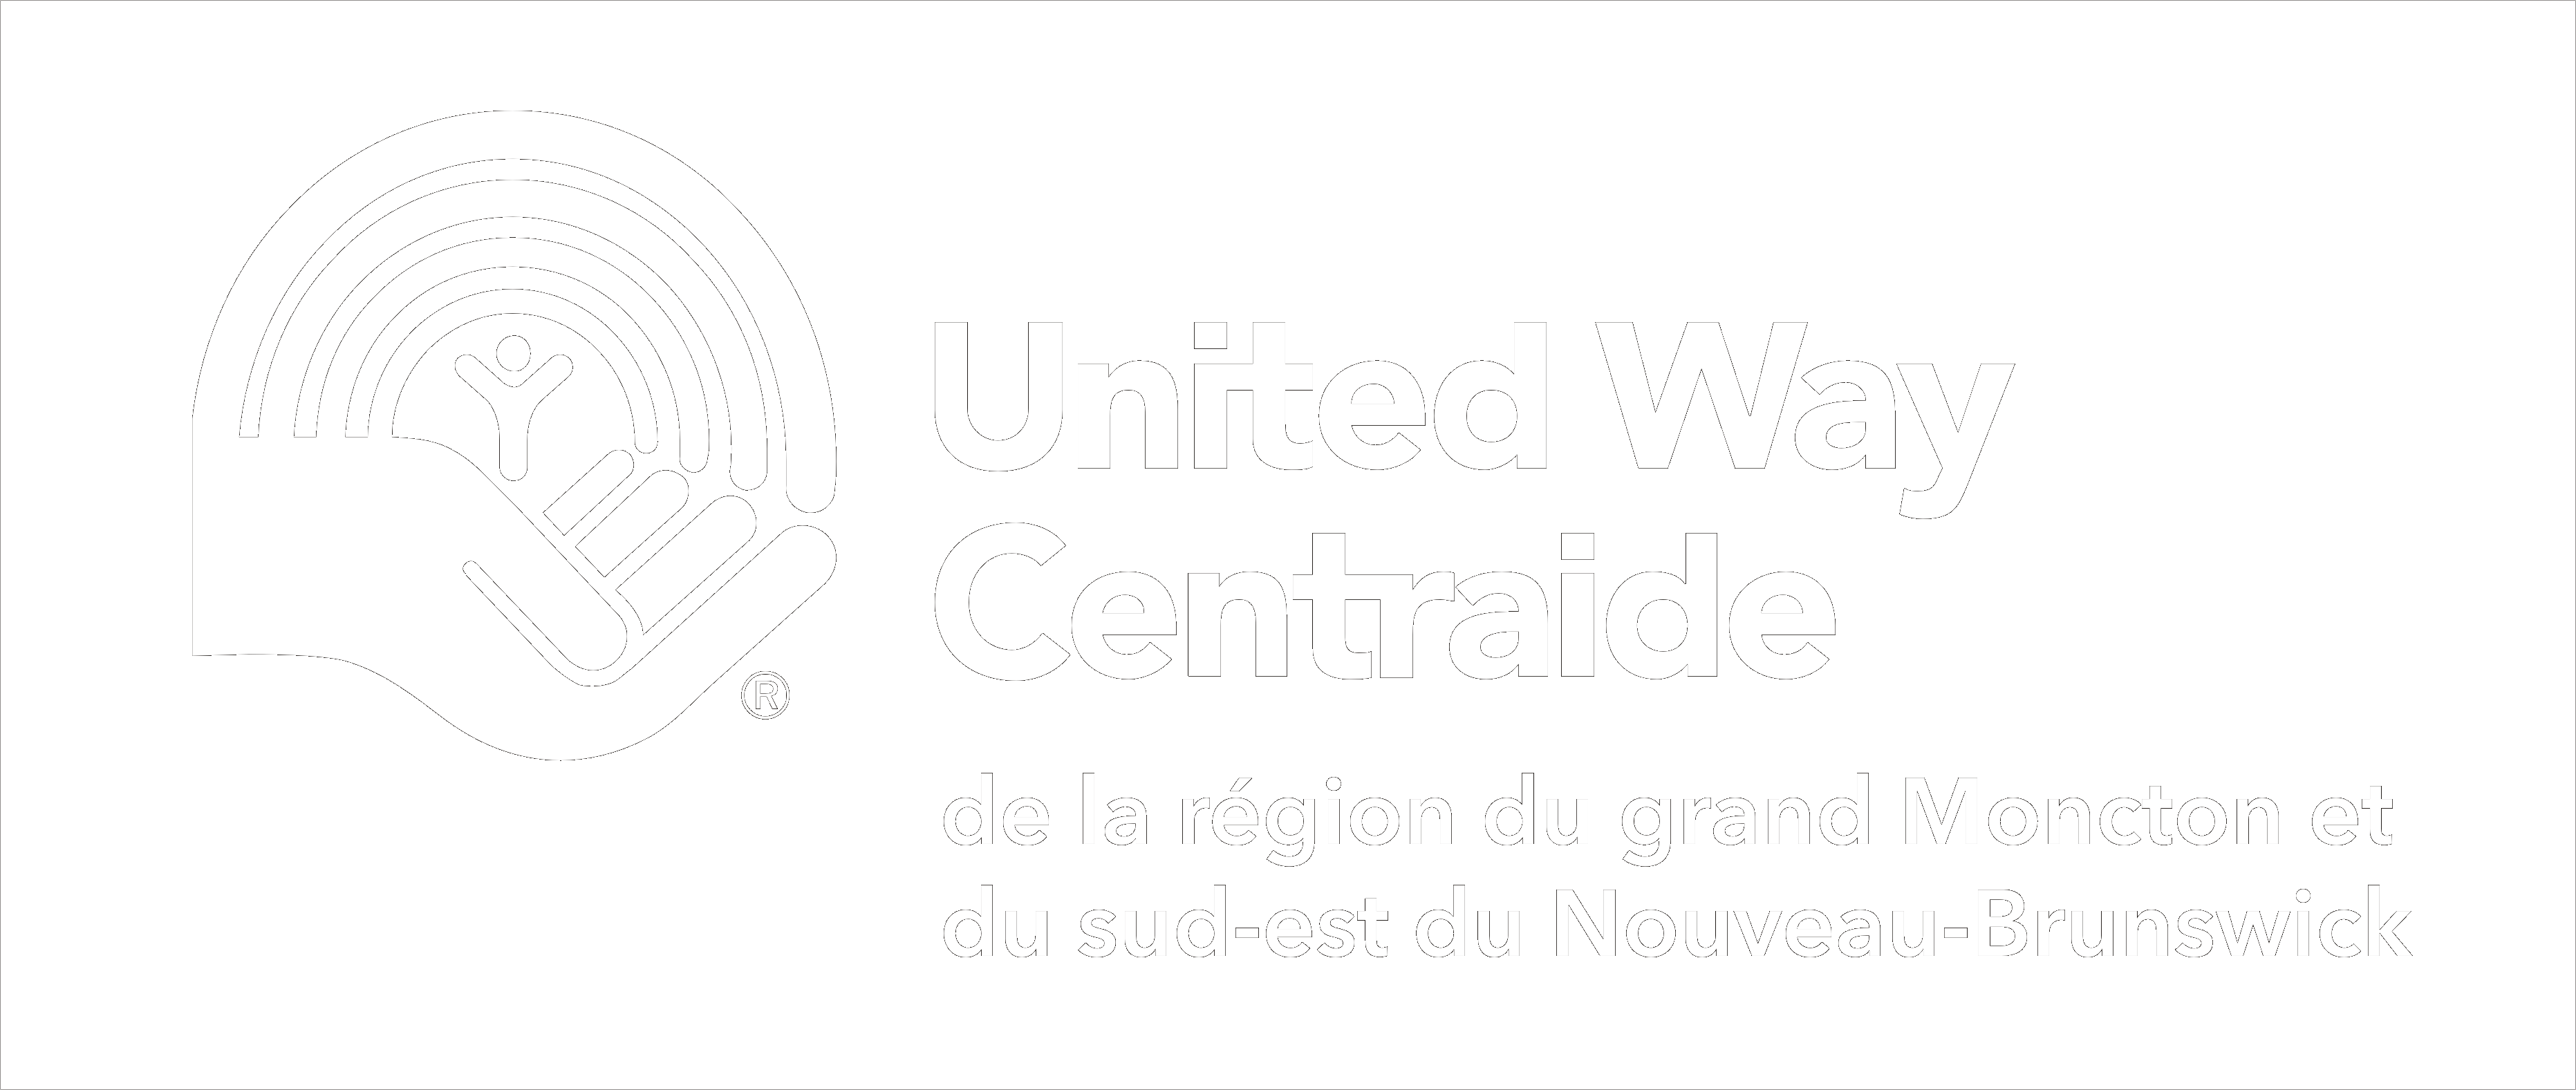 United Way Greater Moncton and Southeastern New Brunswick